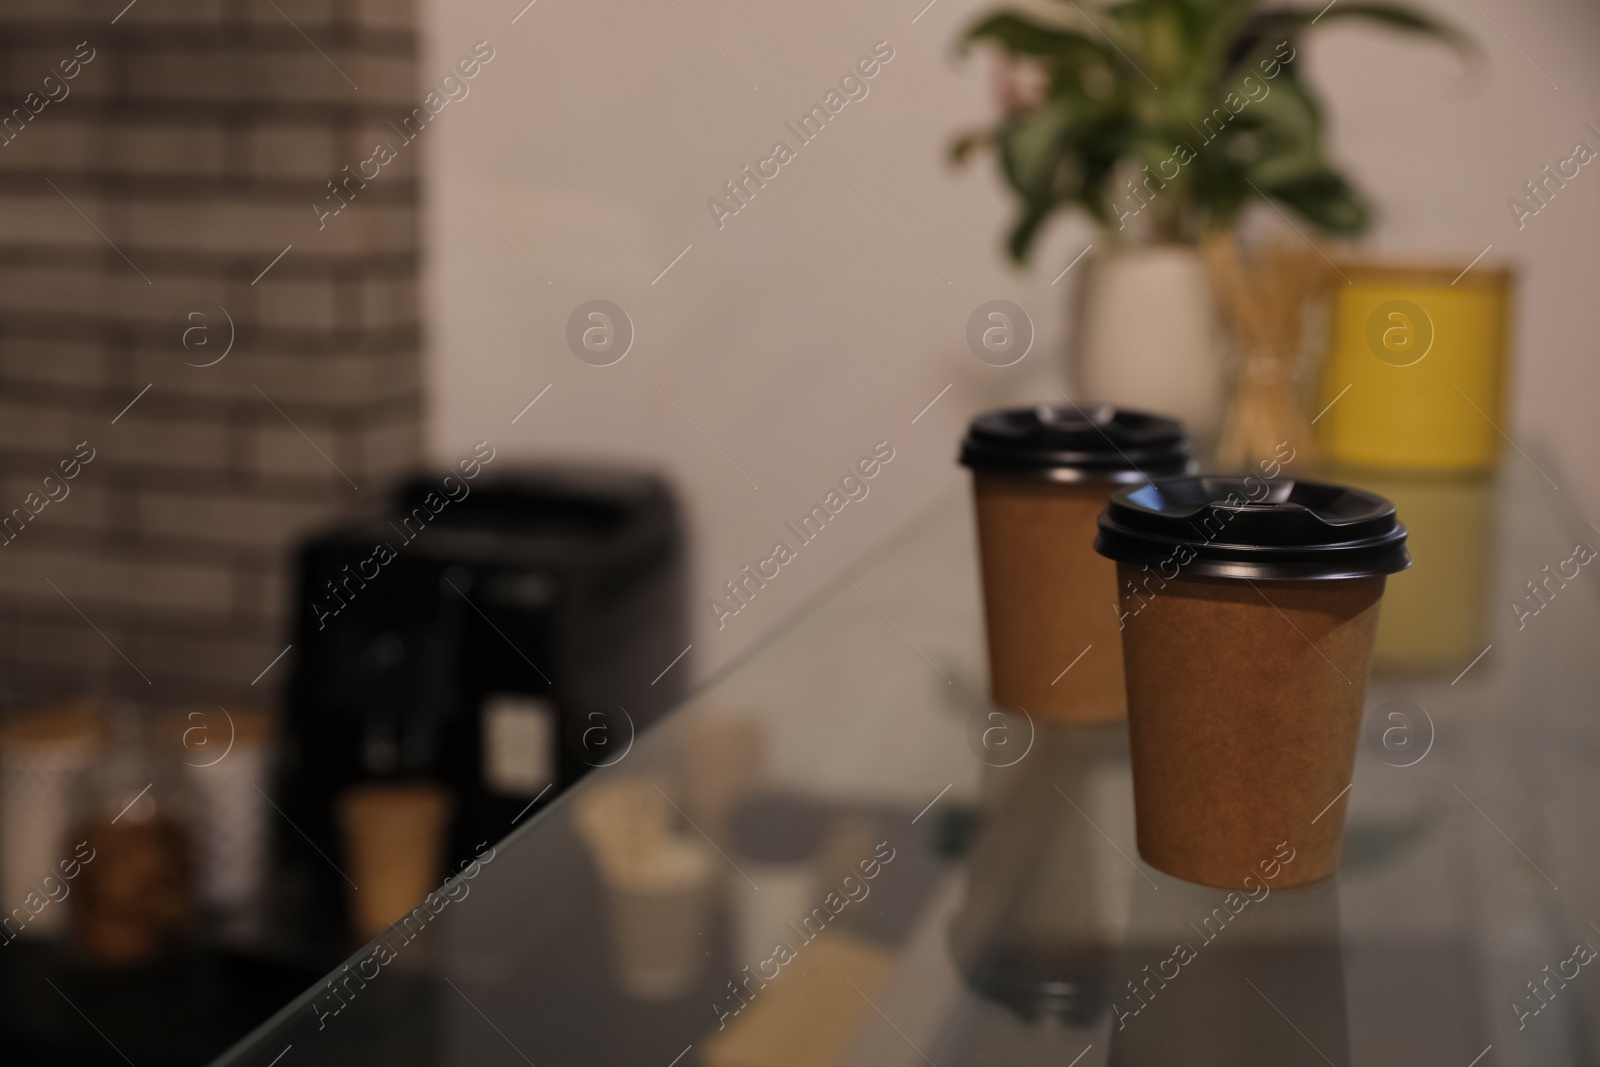 Photo of Takeaway coffee cups with plastic lids on glass table in cafe. Space for text